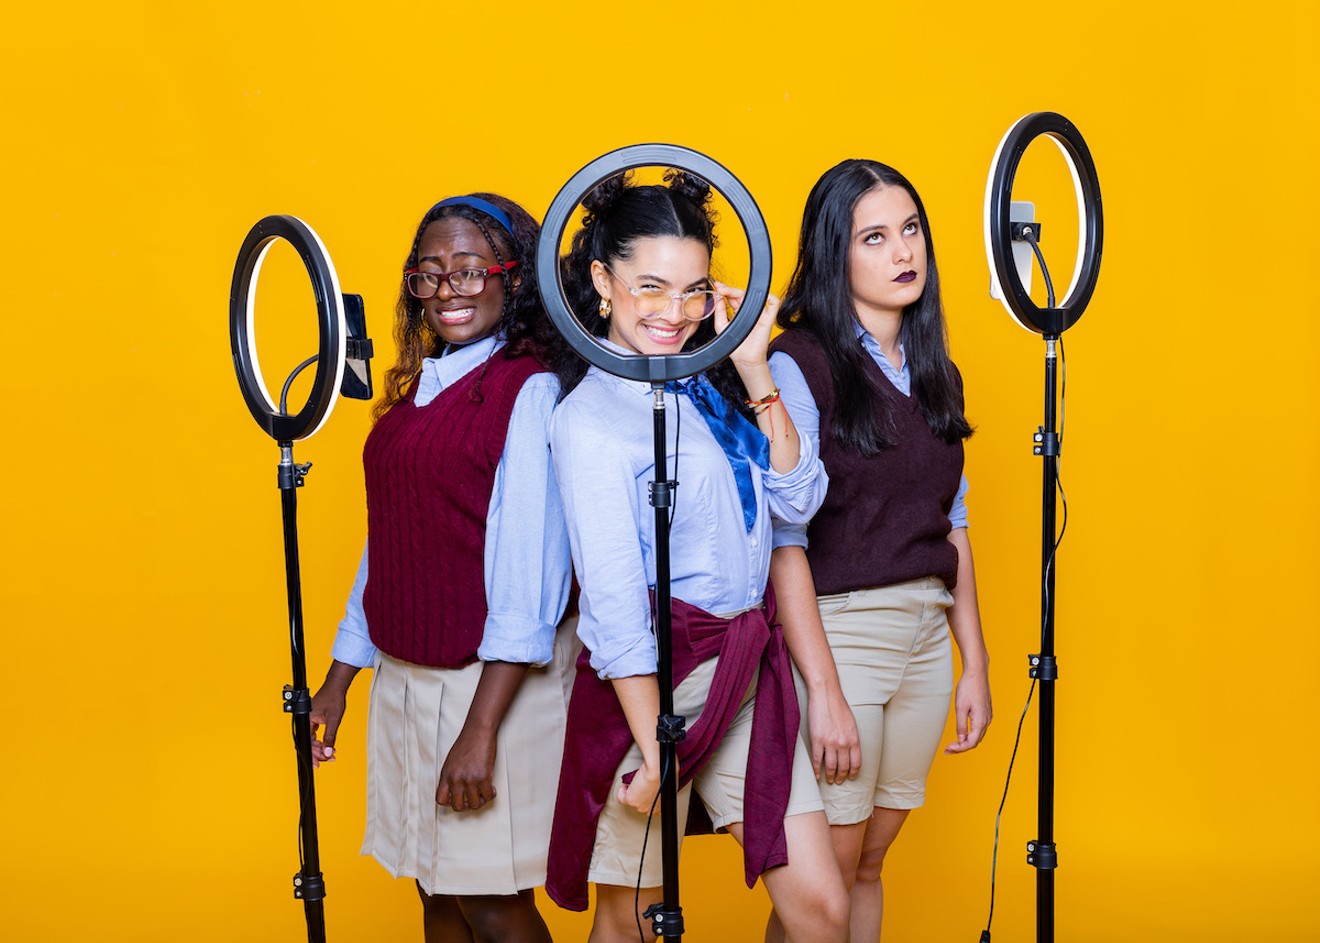 Brette-Raia Curah, Lauren Cristina Lopez, and Chabely Ponce are going for a social media makeover in Ariel Cipolla's The Vultures, one of the plays featured in City Theatre's Summer Shorts: Homegrown Edition.